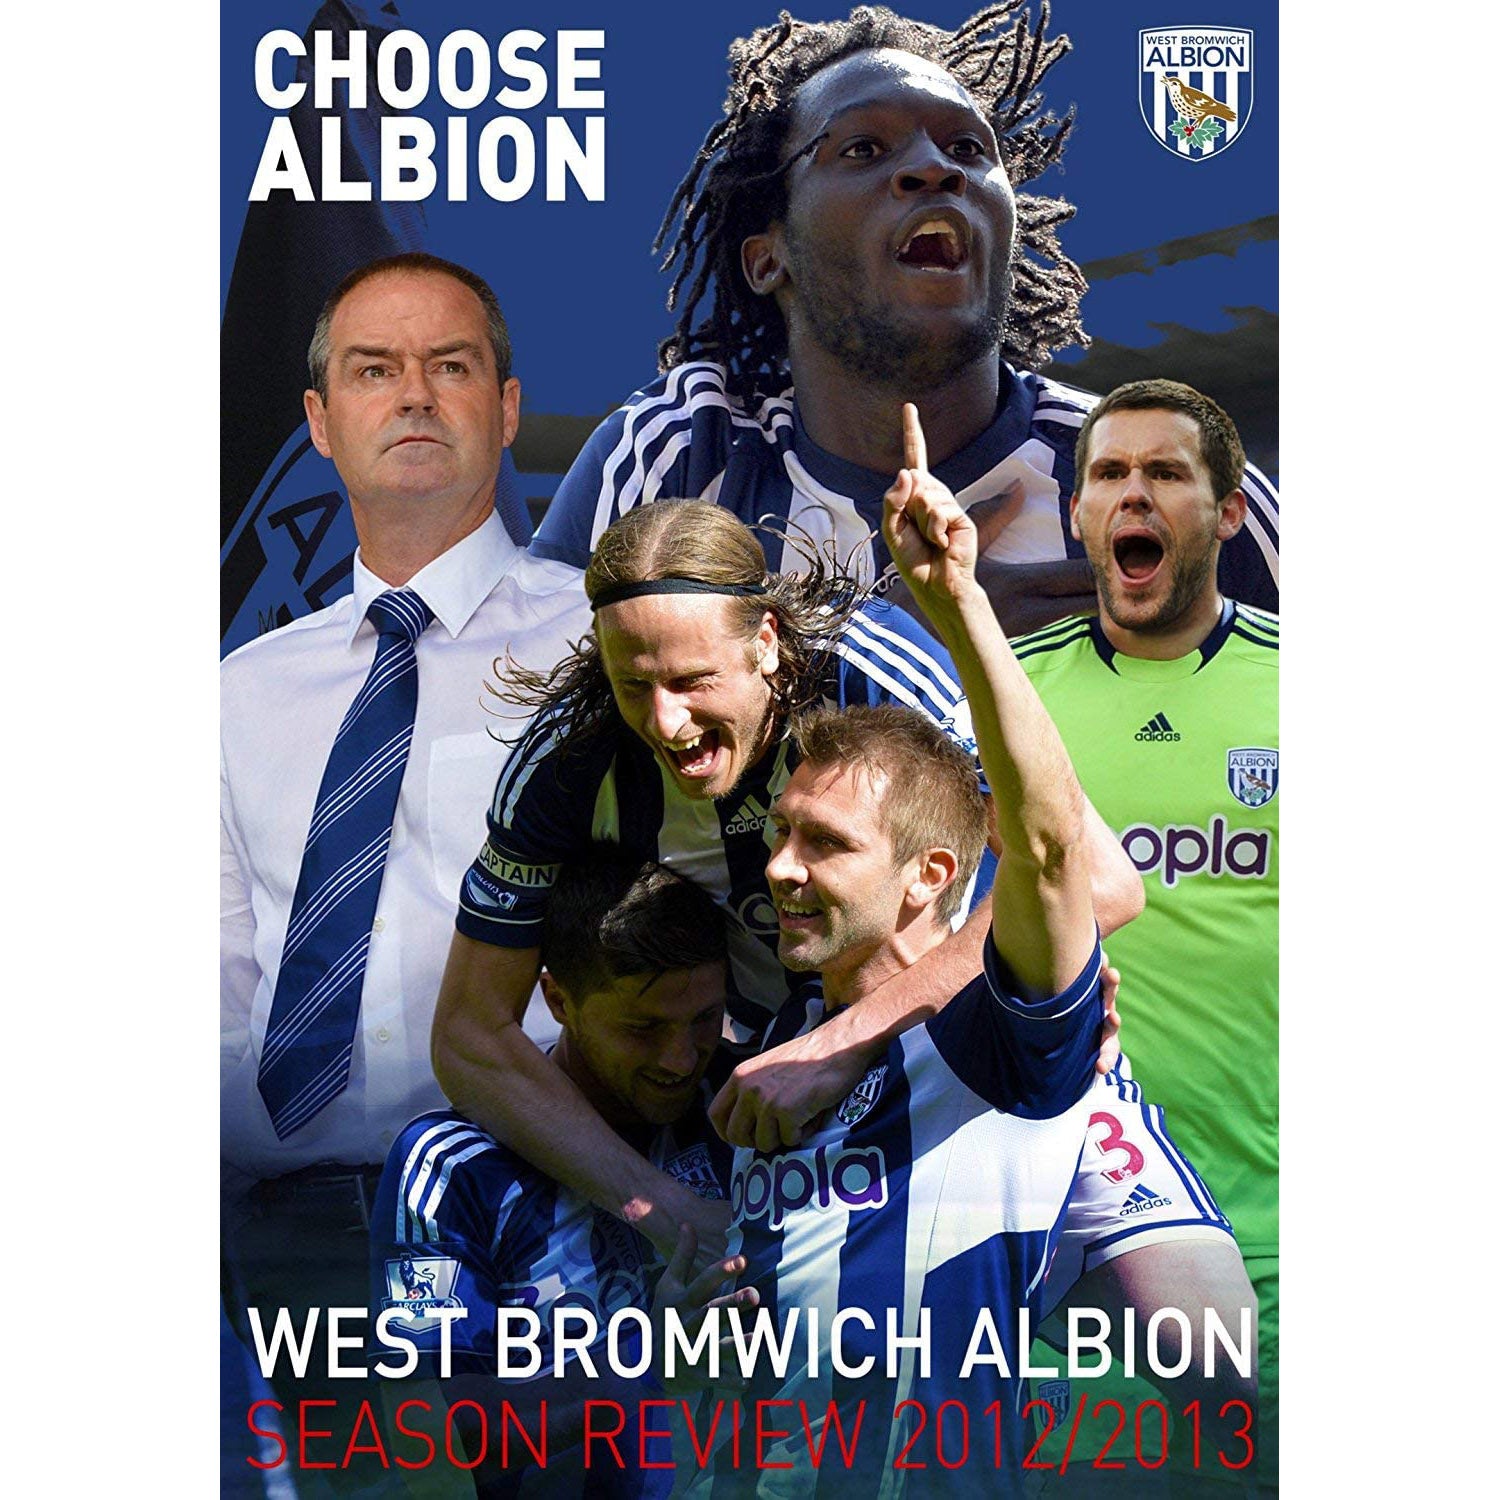 West Bromwich Albion Season Review 2012/2013 – The Beautiful Game